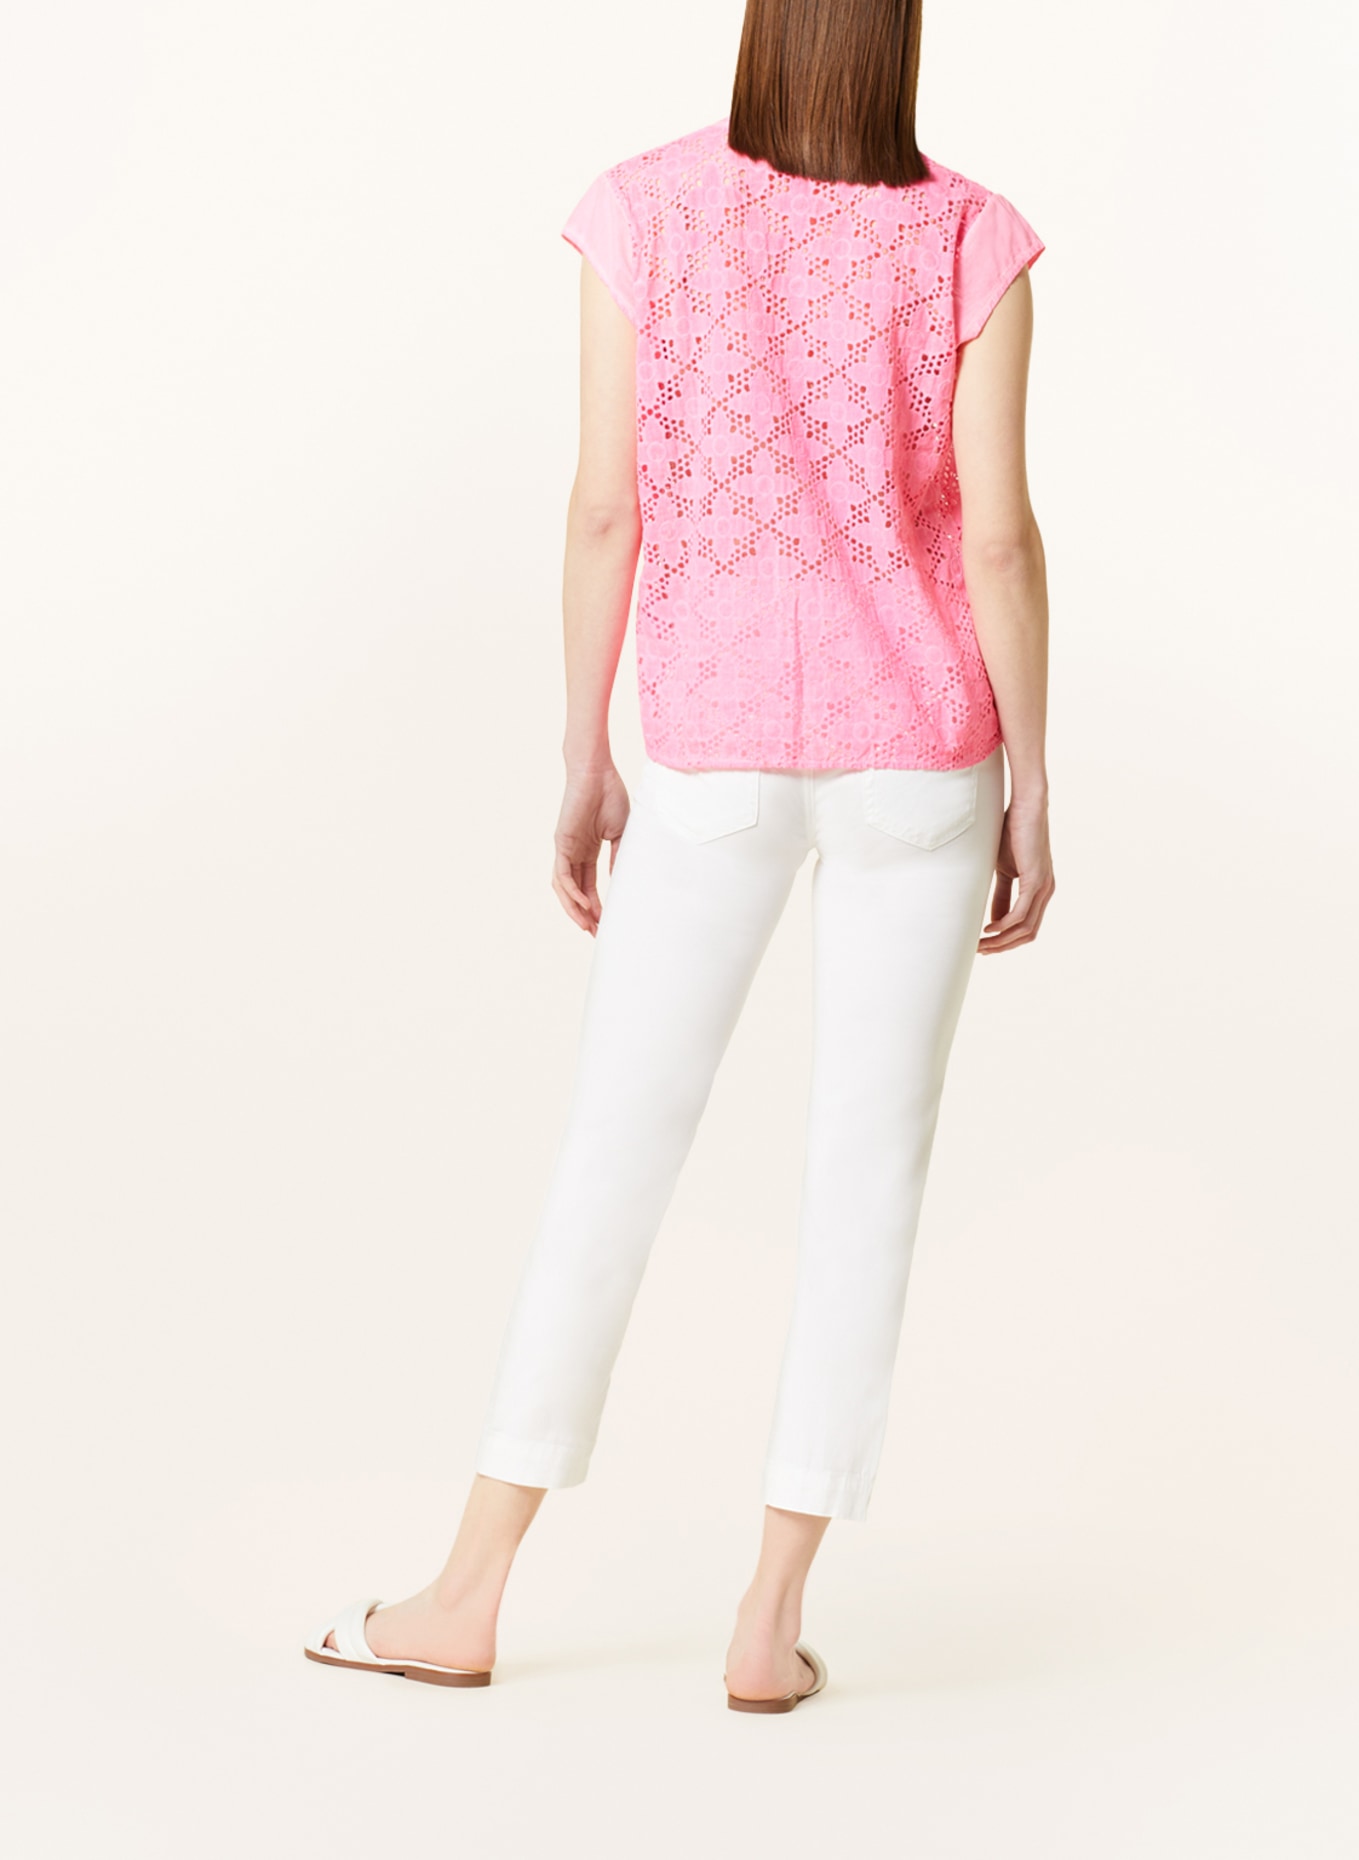 FRIEDA & FREDDIES Shirt blouse made of lace, Color: NEON PINK (Image 3)